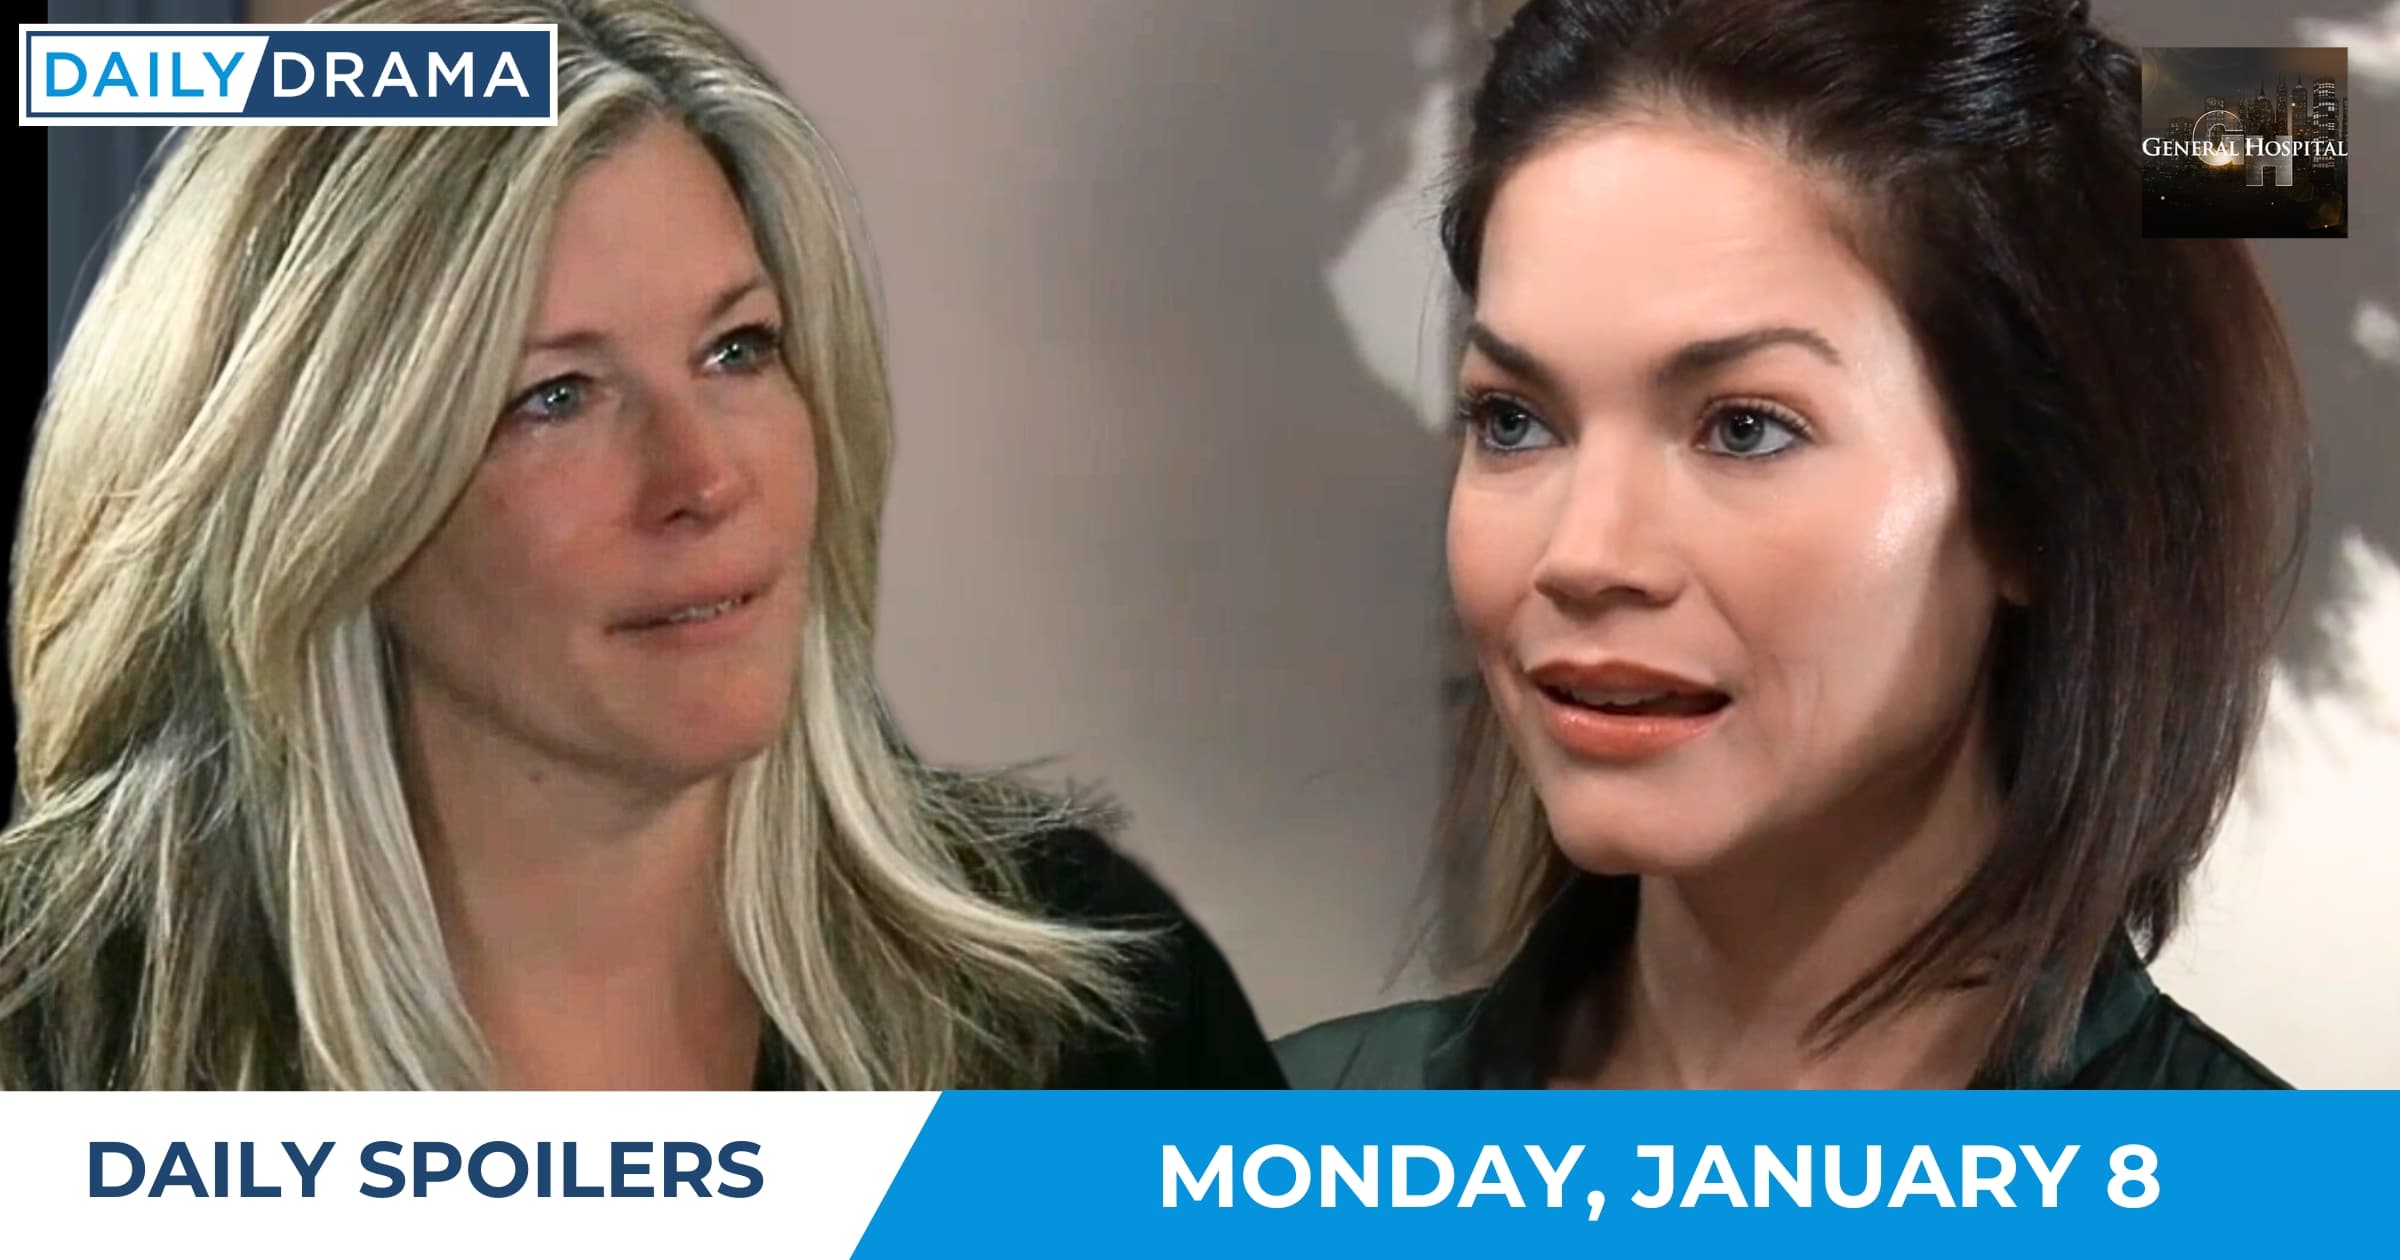 General Hospital Daily Spoilers - Jan 8 - Carly and Elizabeth